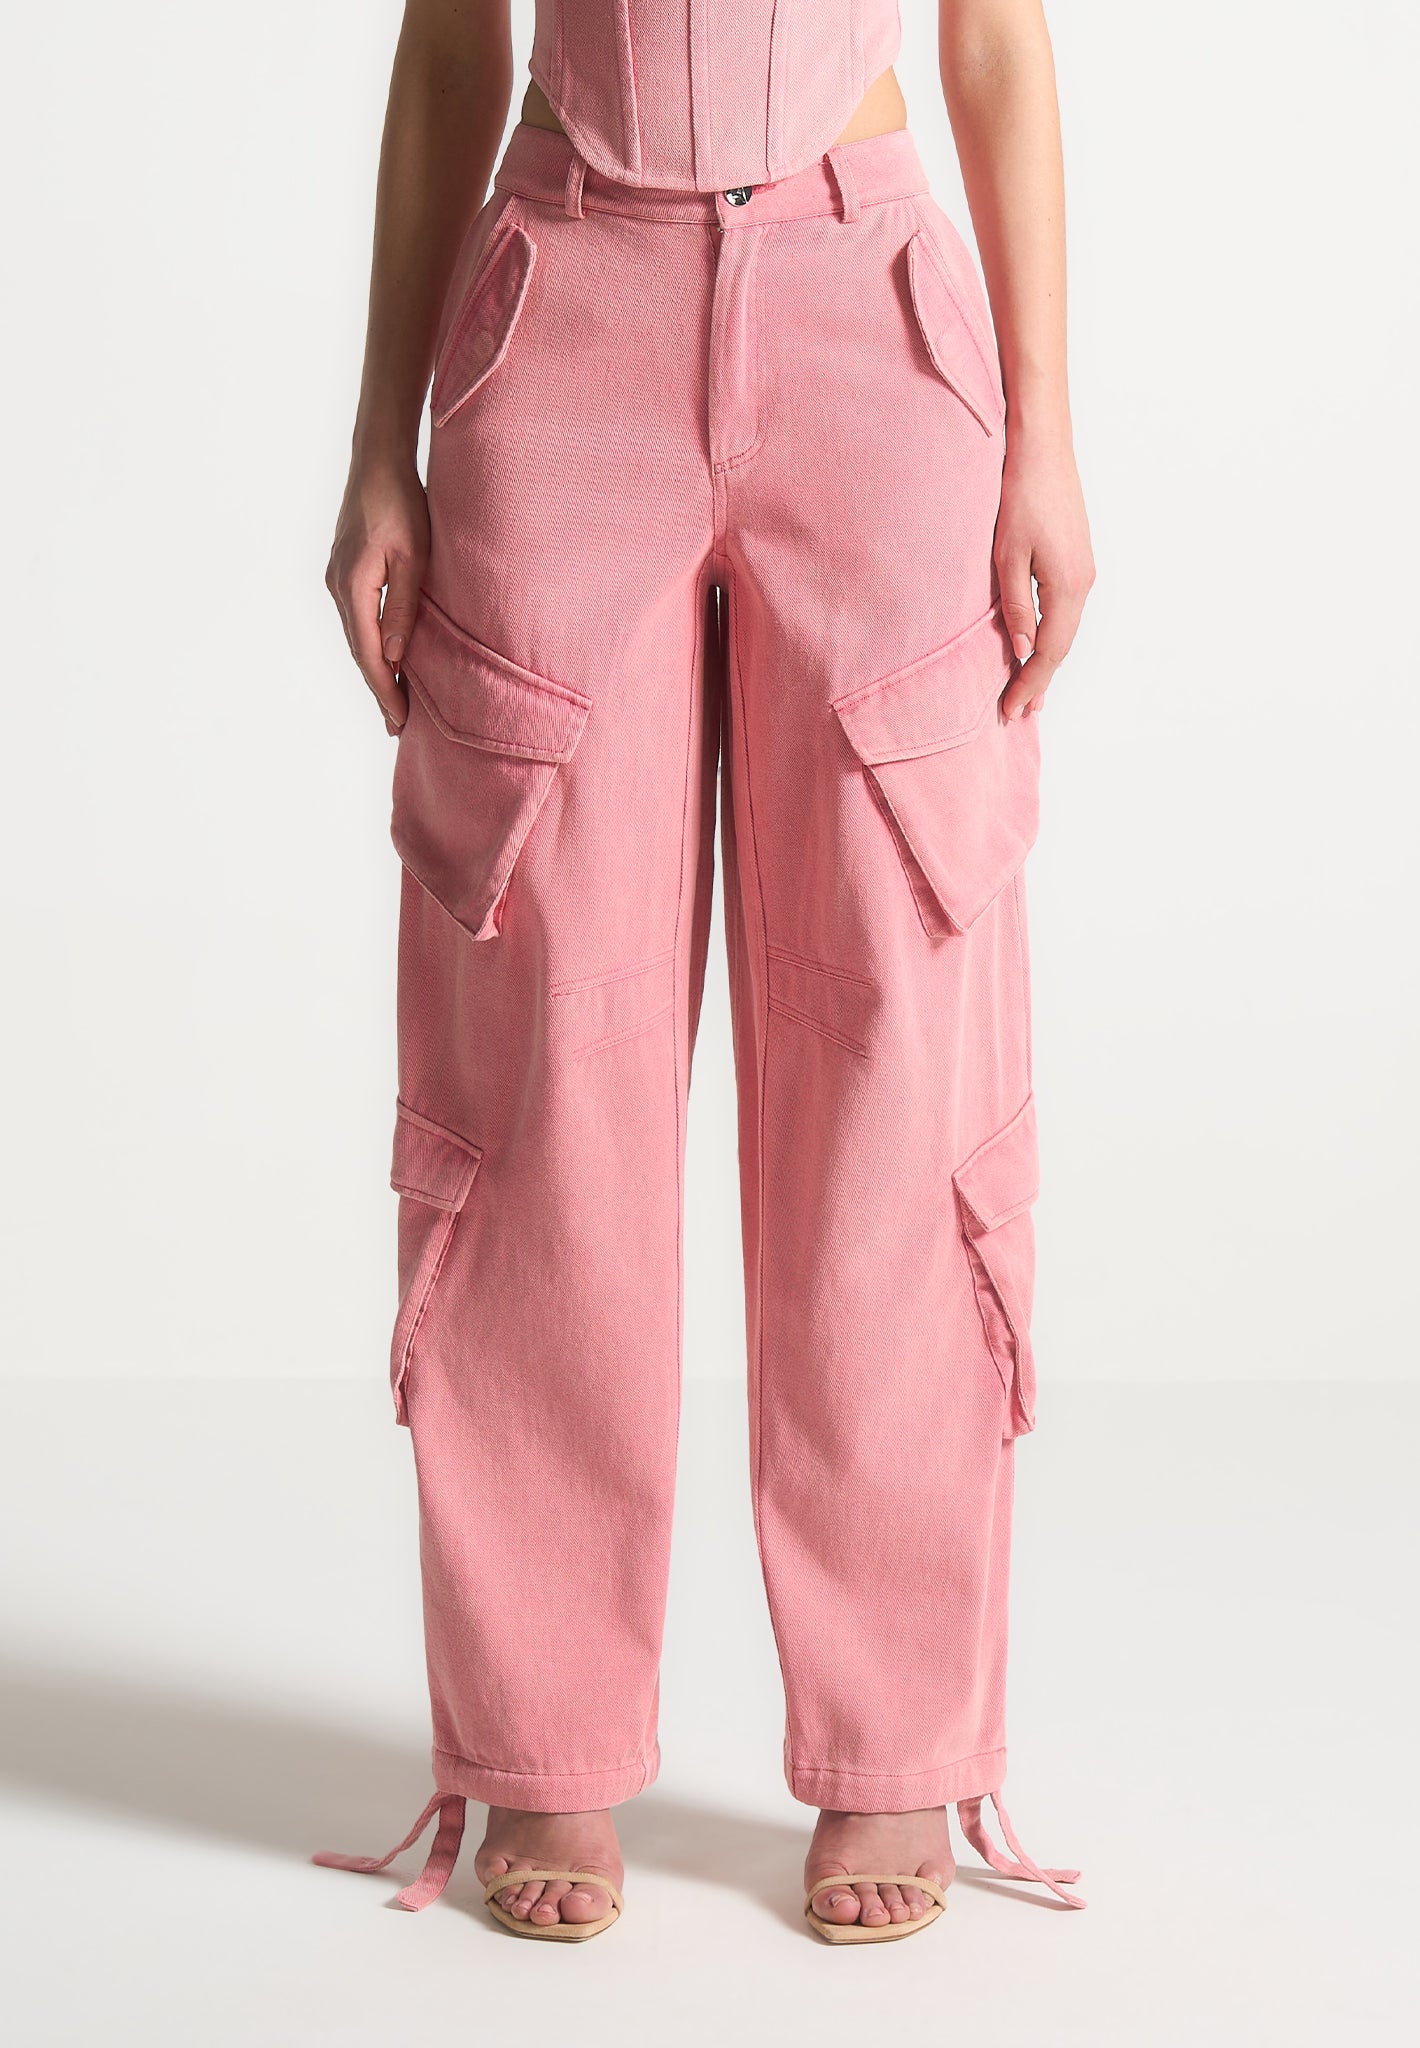 Pink high waisted pleated stretch Women Trousers